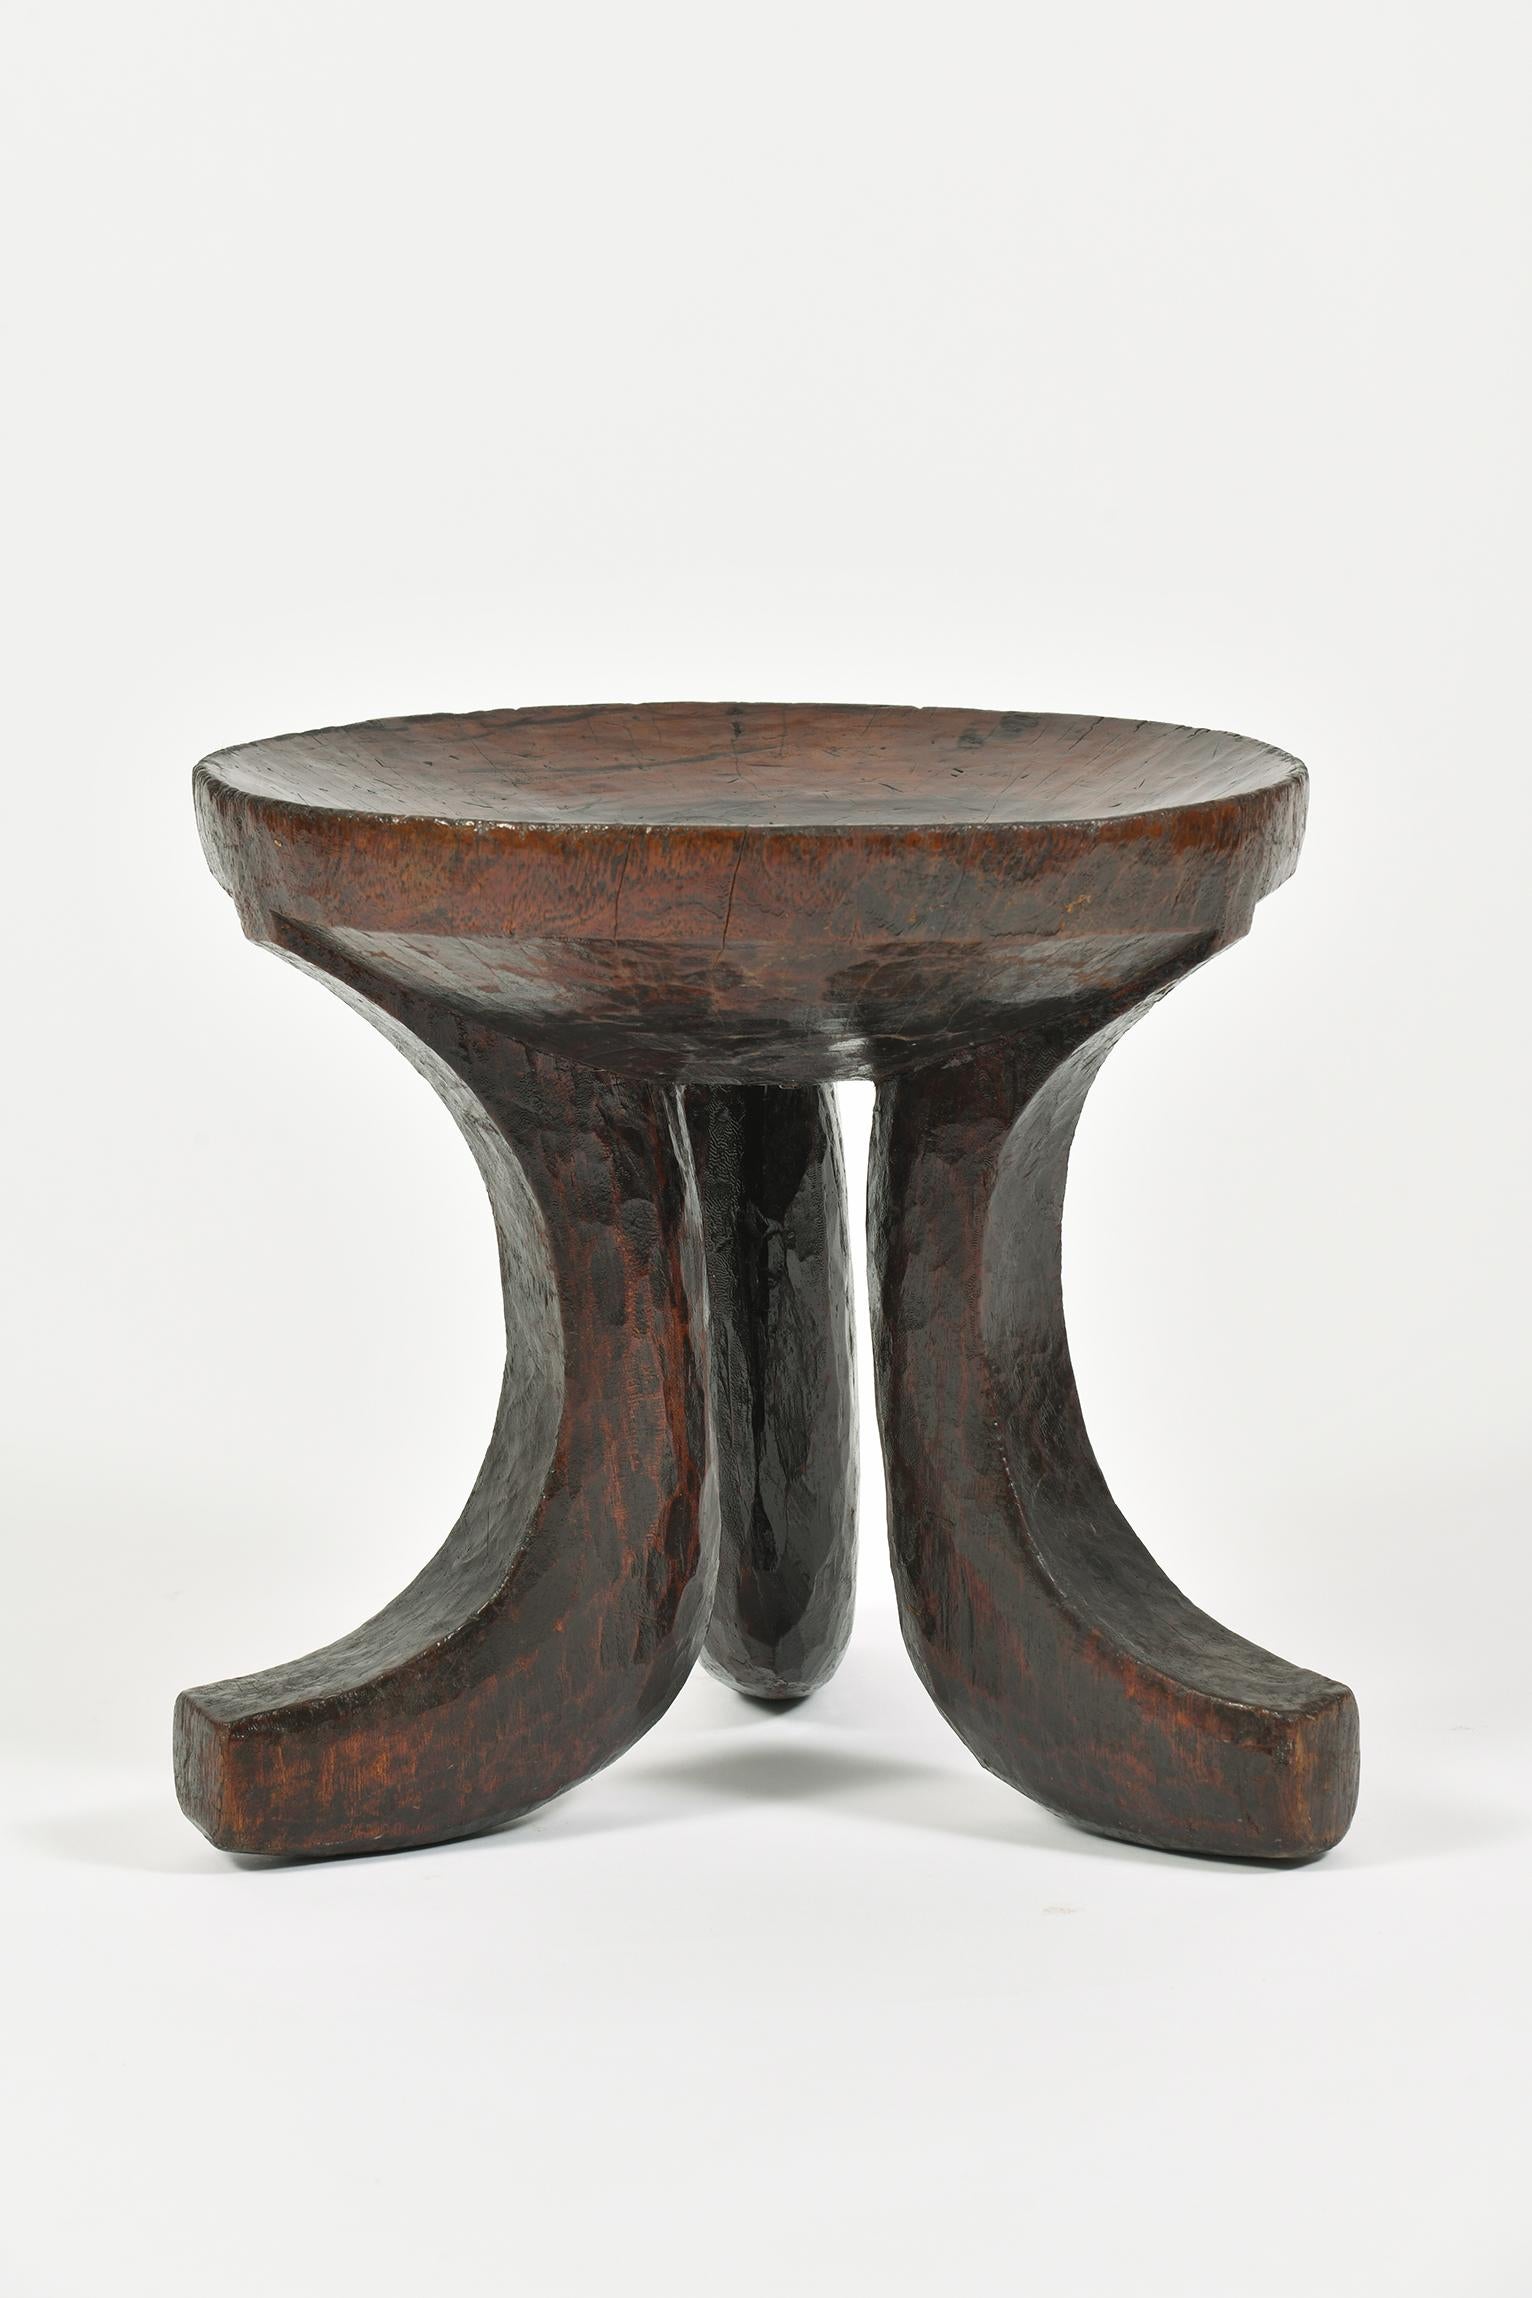 Tribal African Carved Wood Tripod Stool